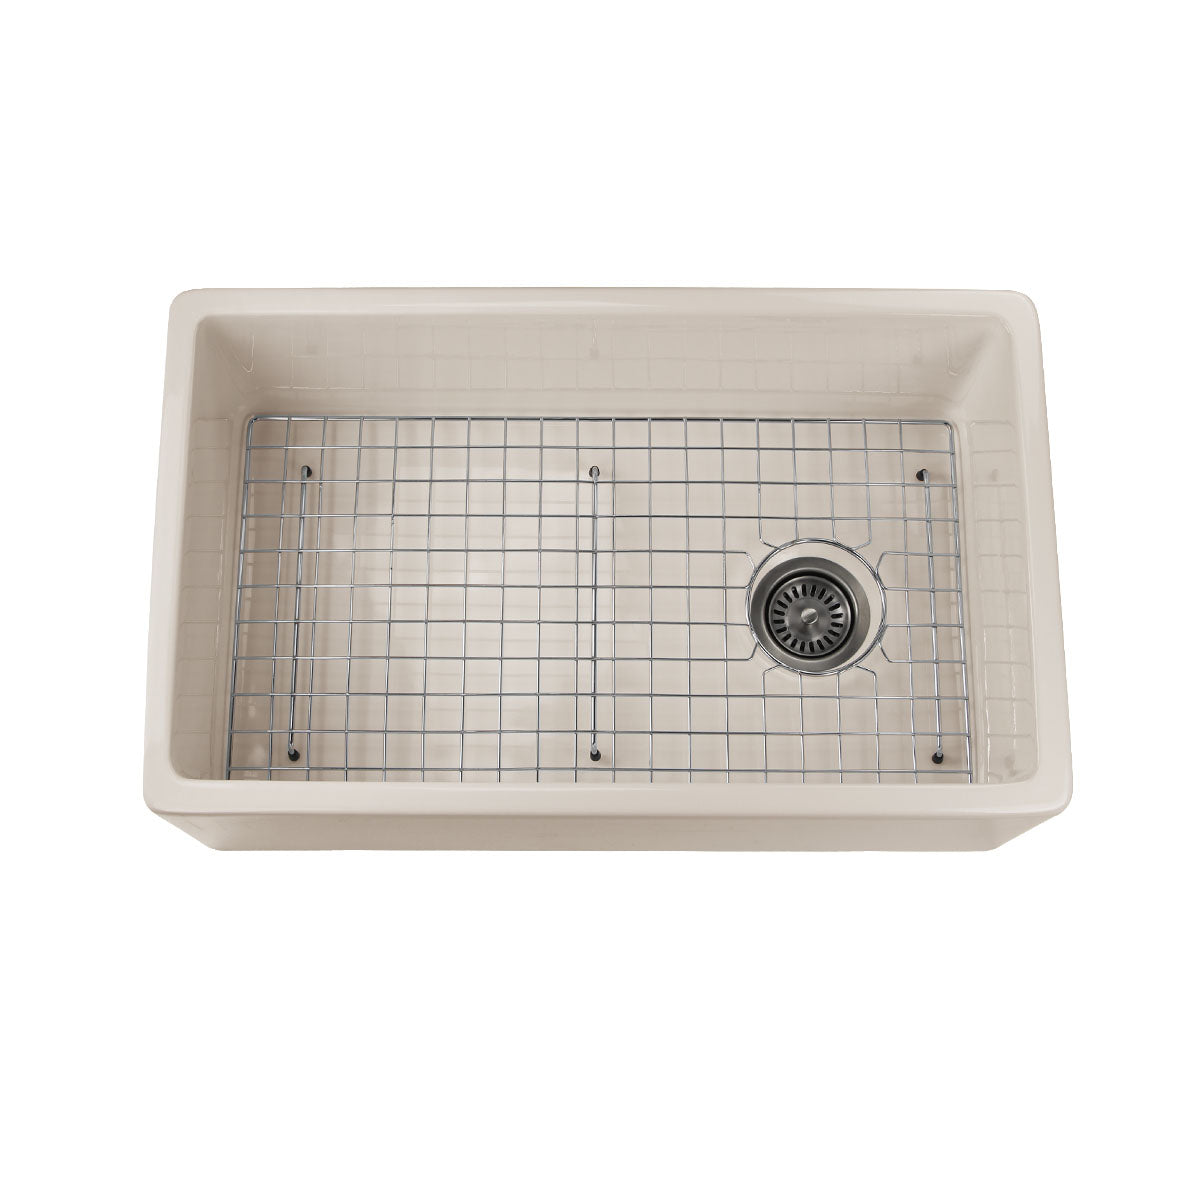 Nantucket Sinks Cape Collection 30" Rectangle Undermount Porcelain Enamel Glaze Bisque Fireclay Single Bowl Bisque Farmhouse Apron Kitchen Sink With Offset Drain and Grid